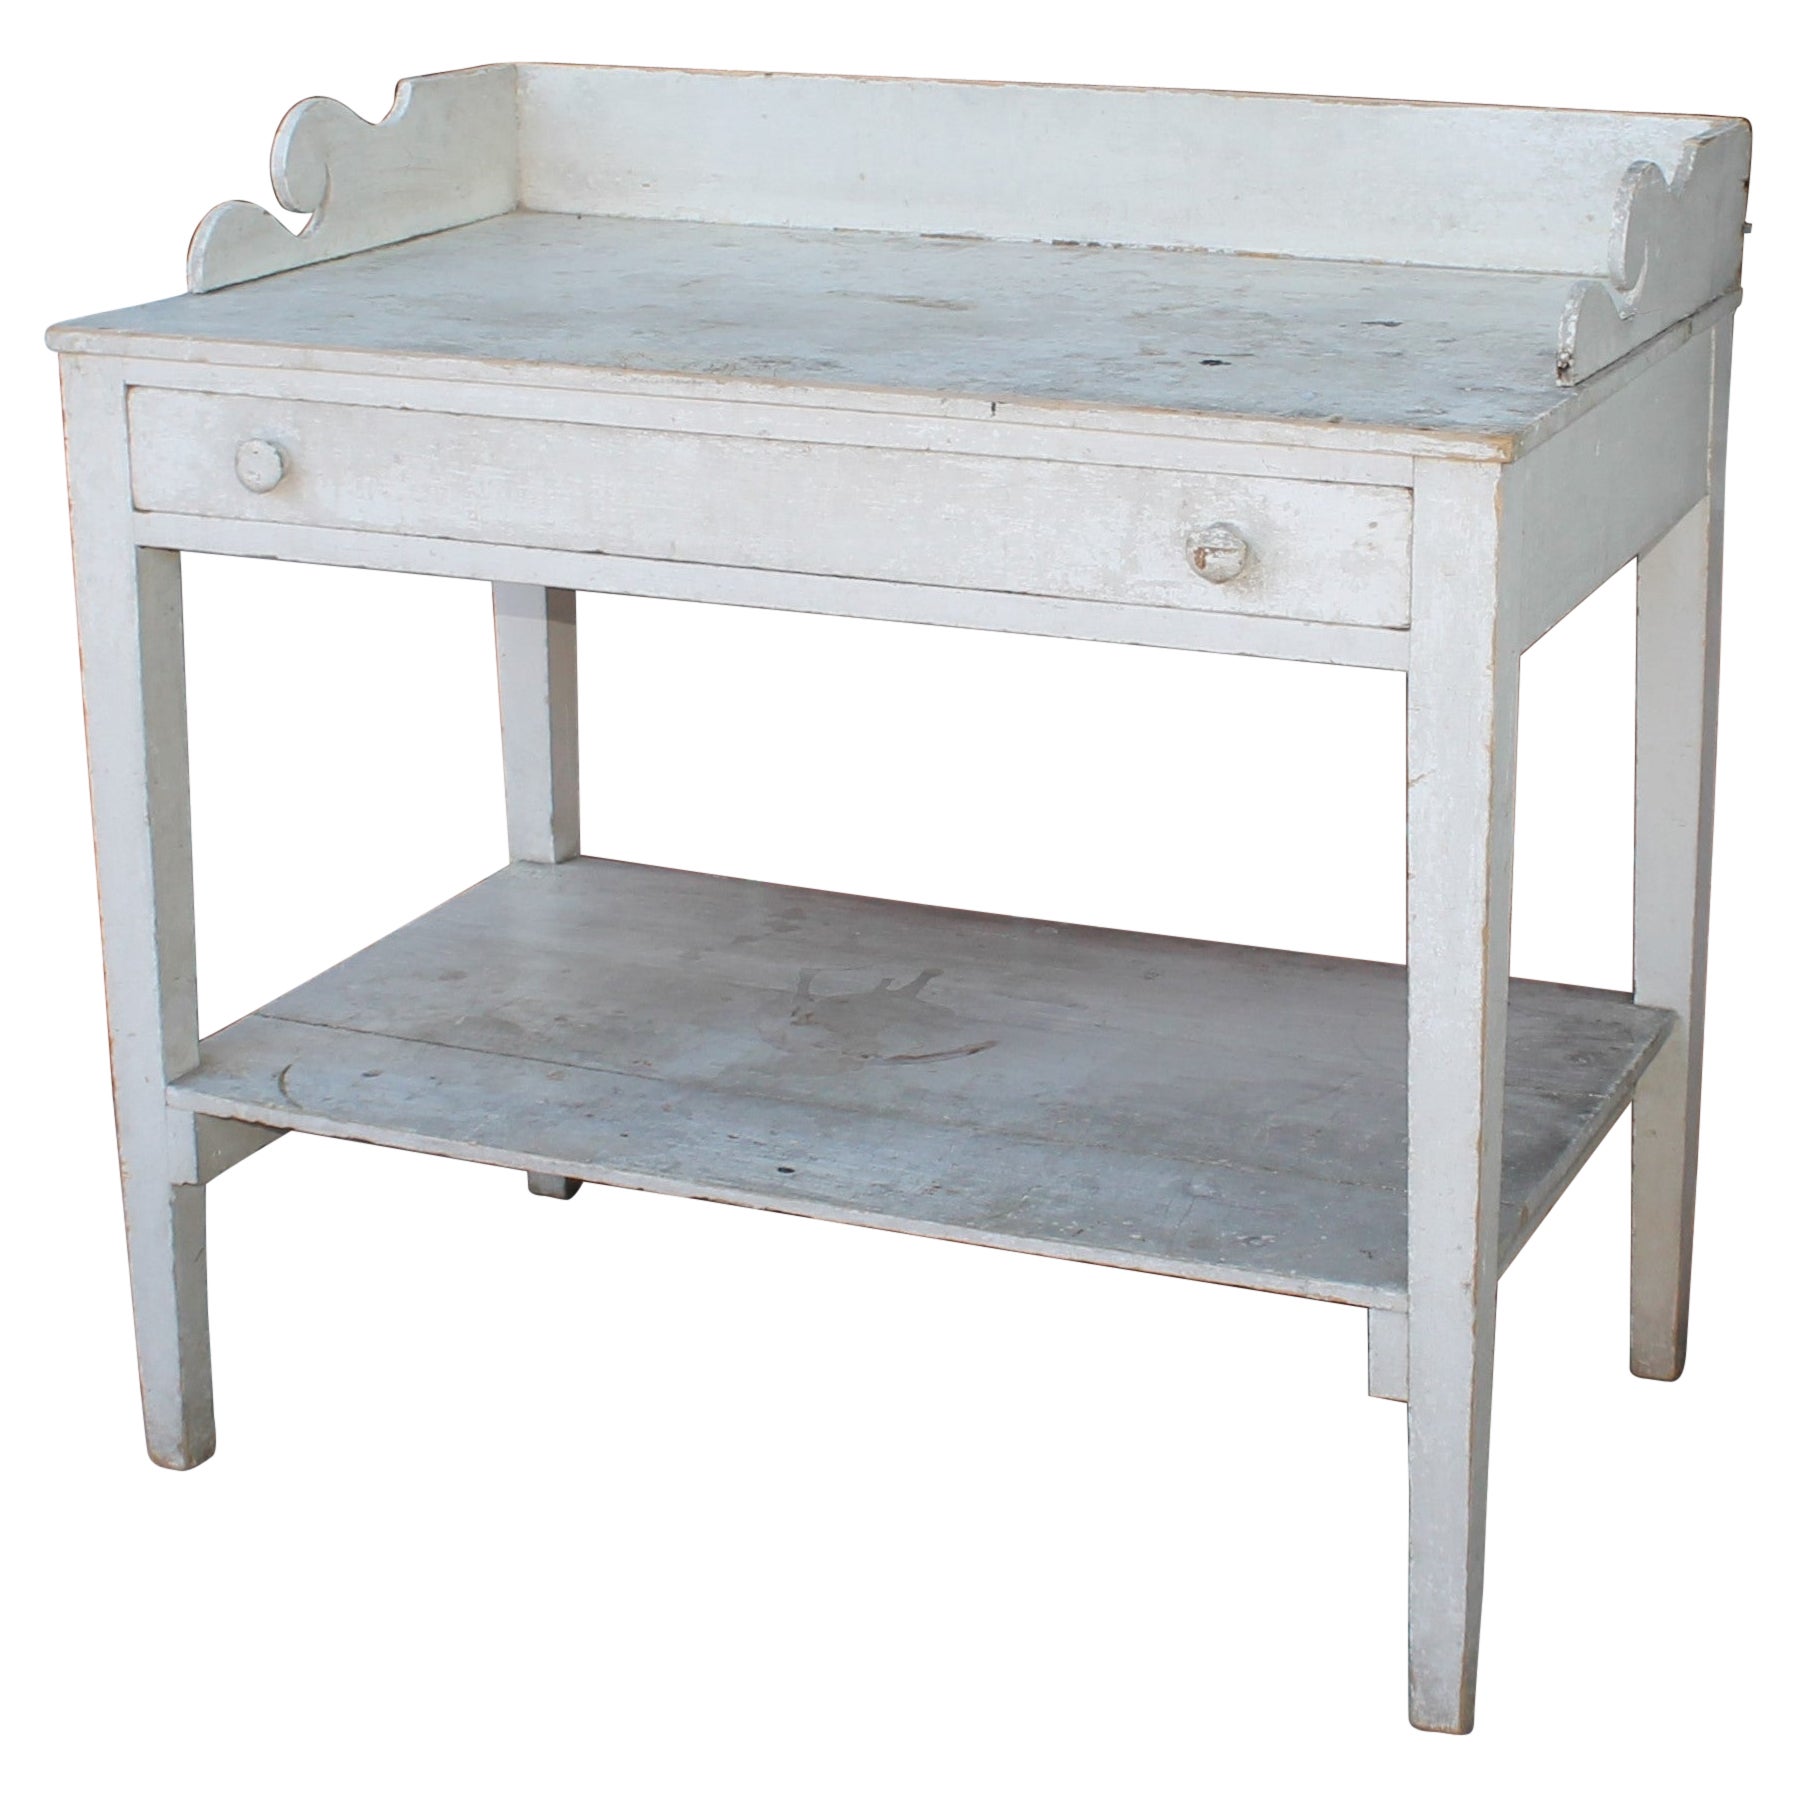 19thc Original White Painted Sideboard / Table